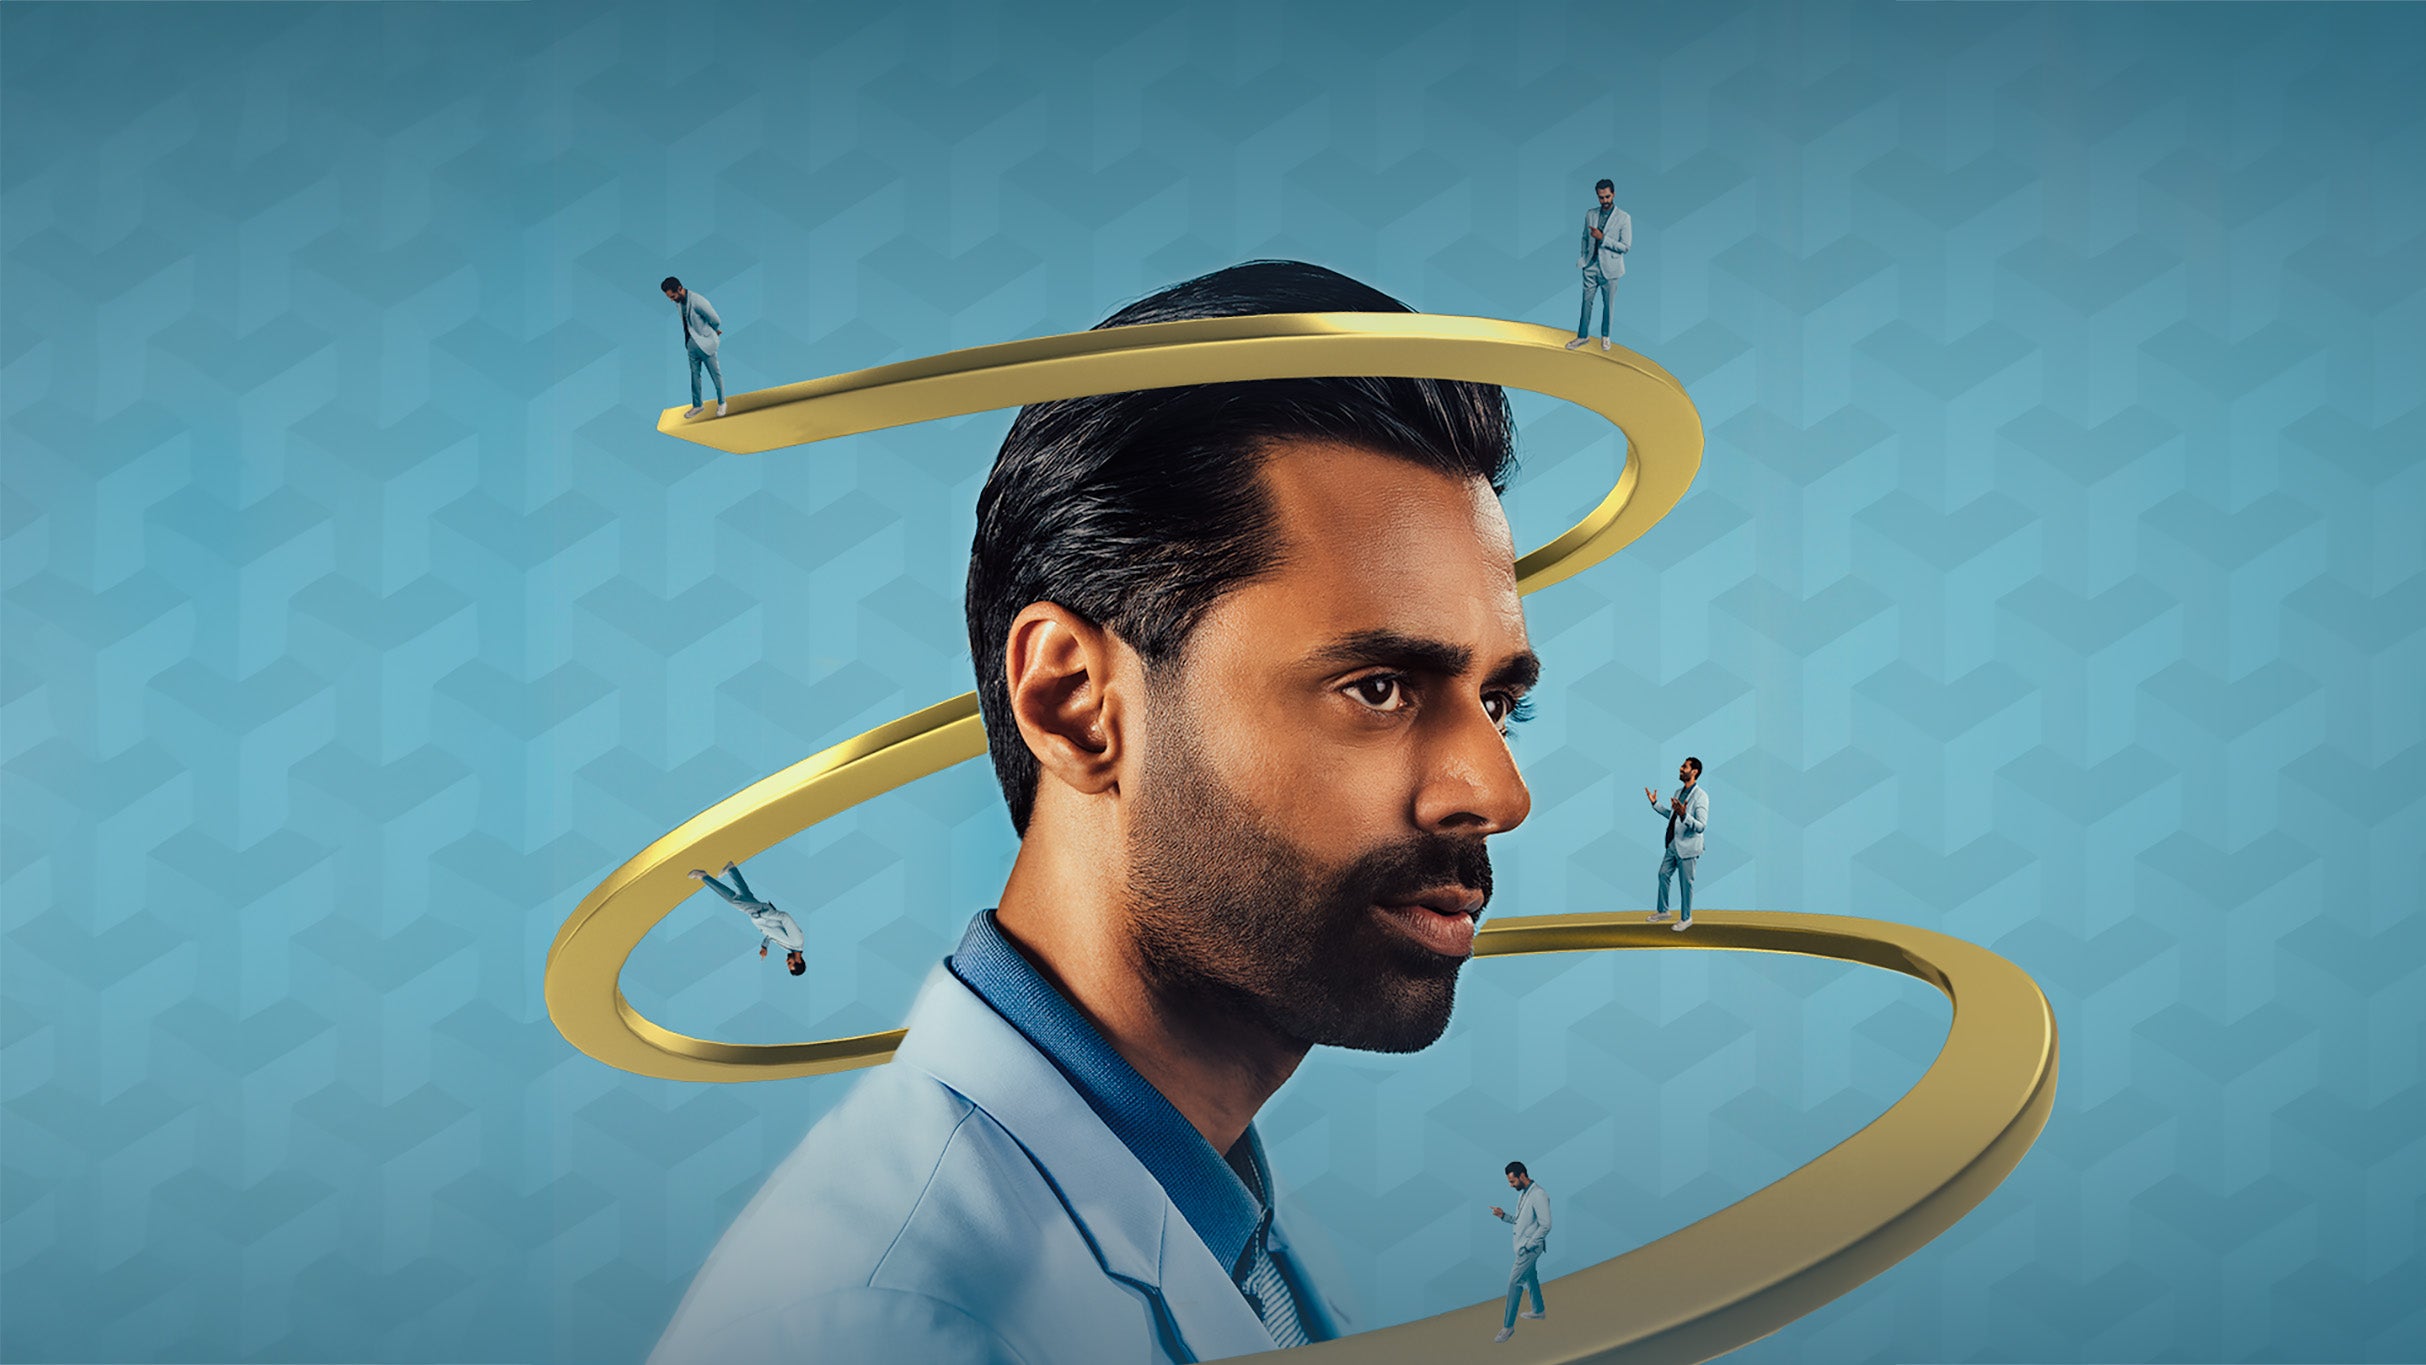 Hasan Minhaj: Off With His Head free presale code for show tickets in Seattle, WA (Paramount Theatre)